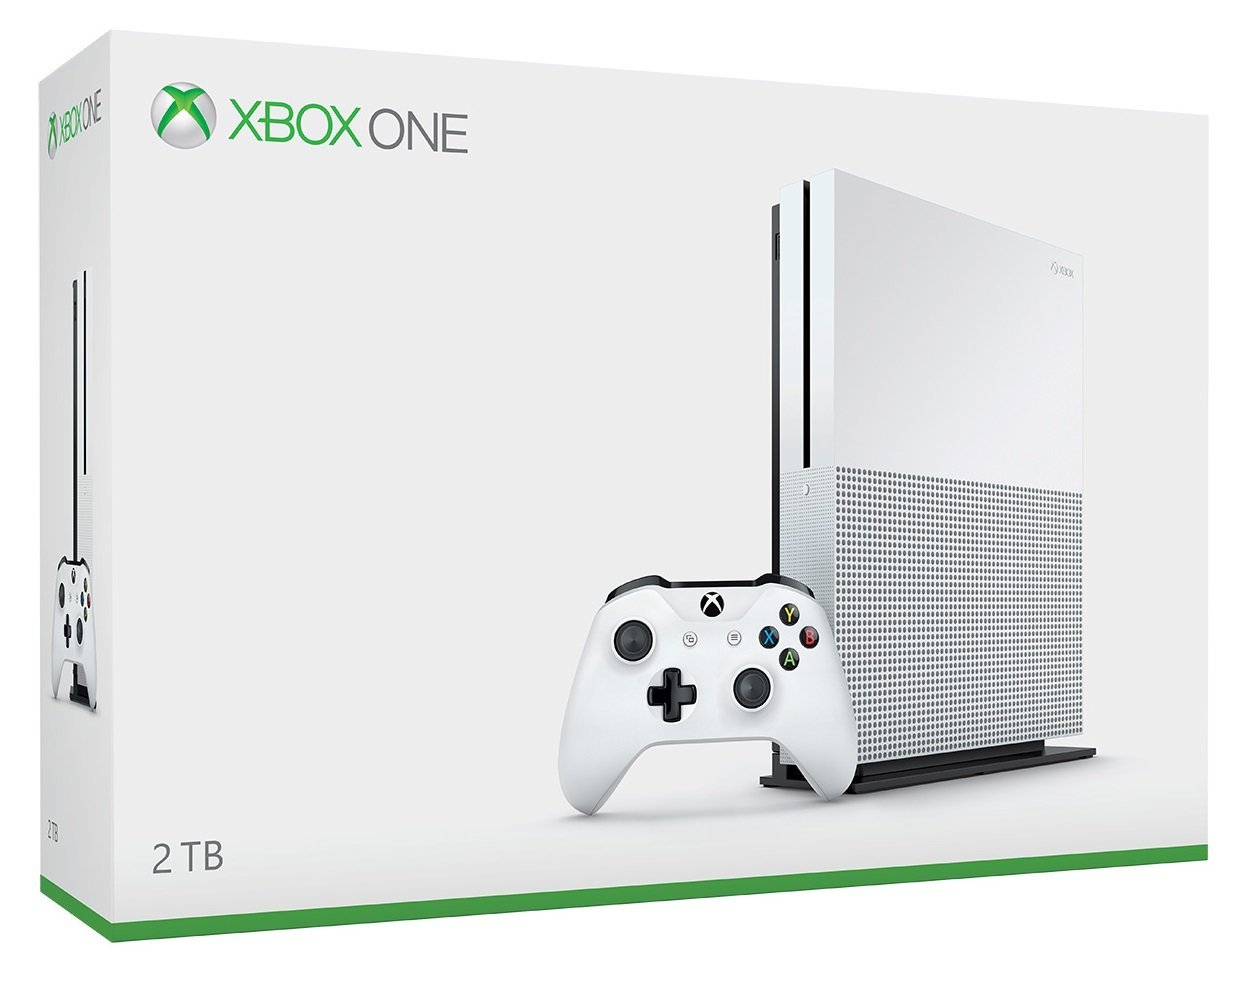 Primary image for Launch Edition Of The Xbox One S With 2Tb Of Storage.